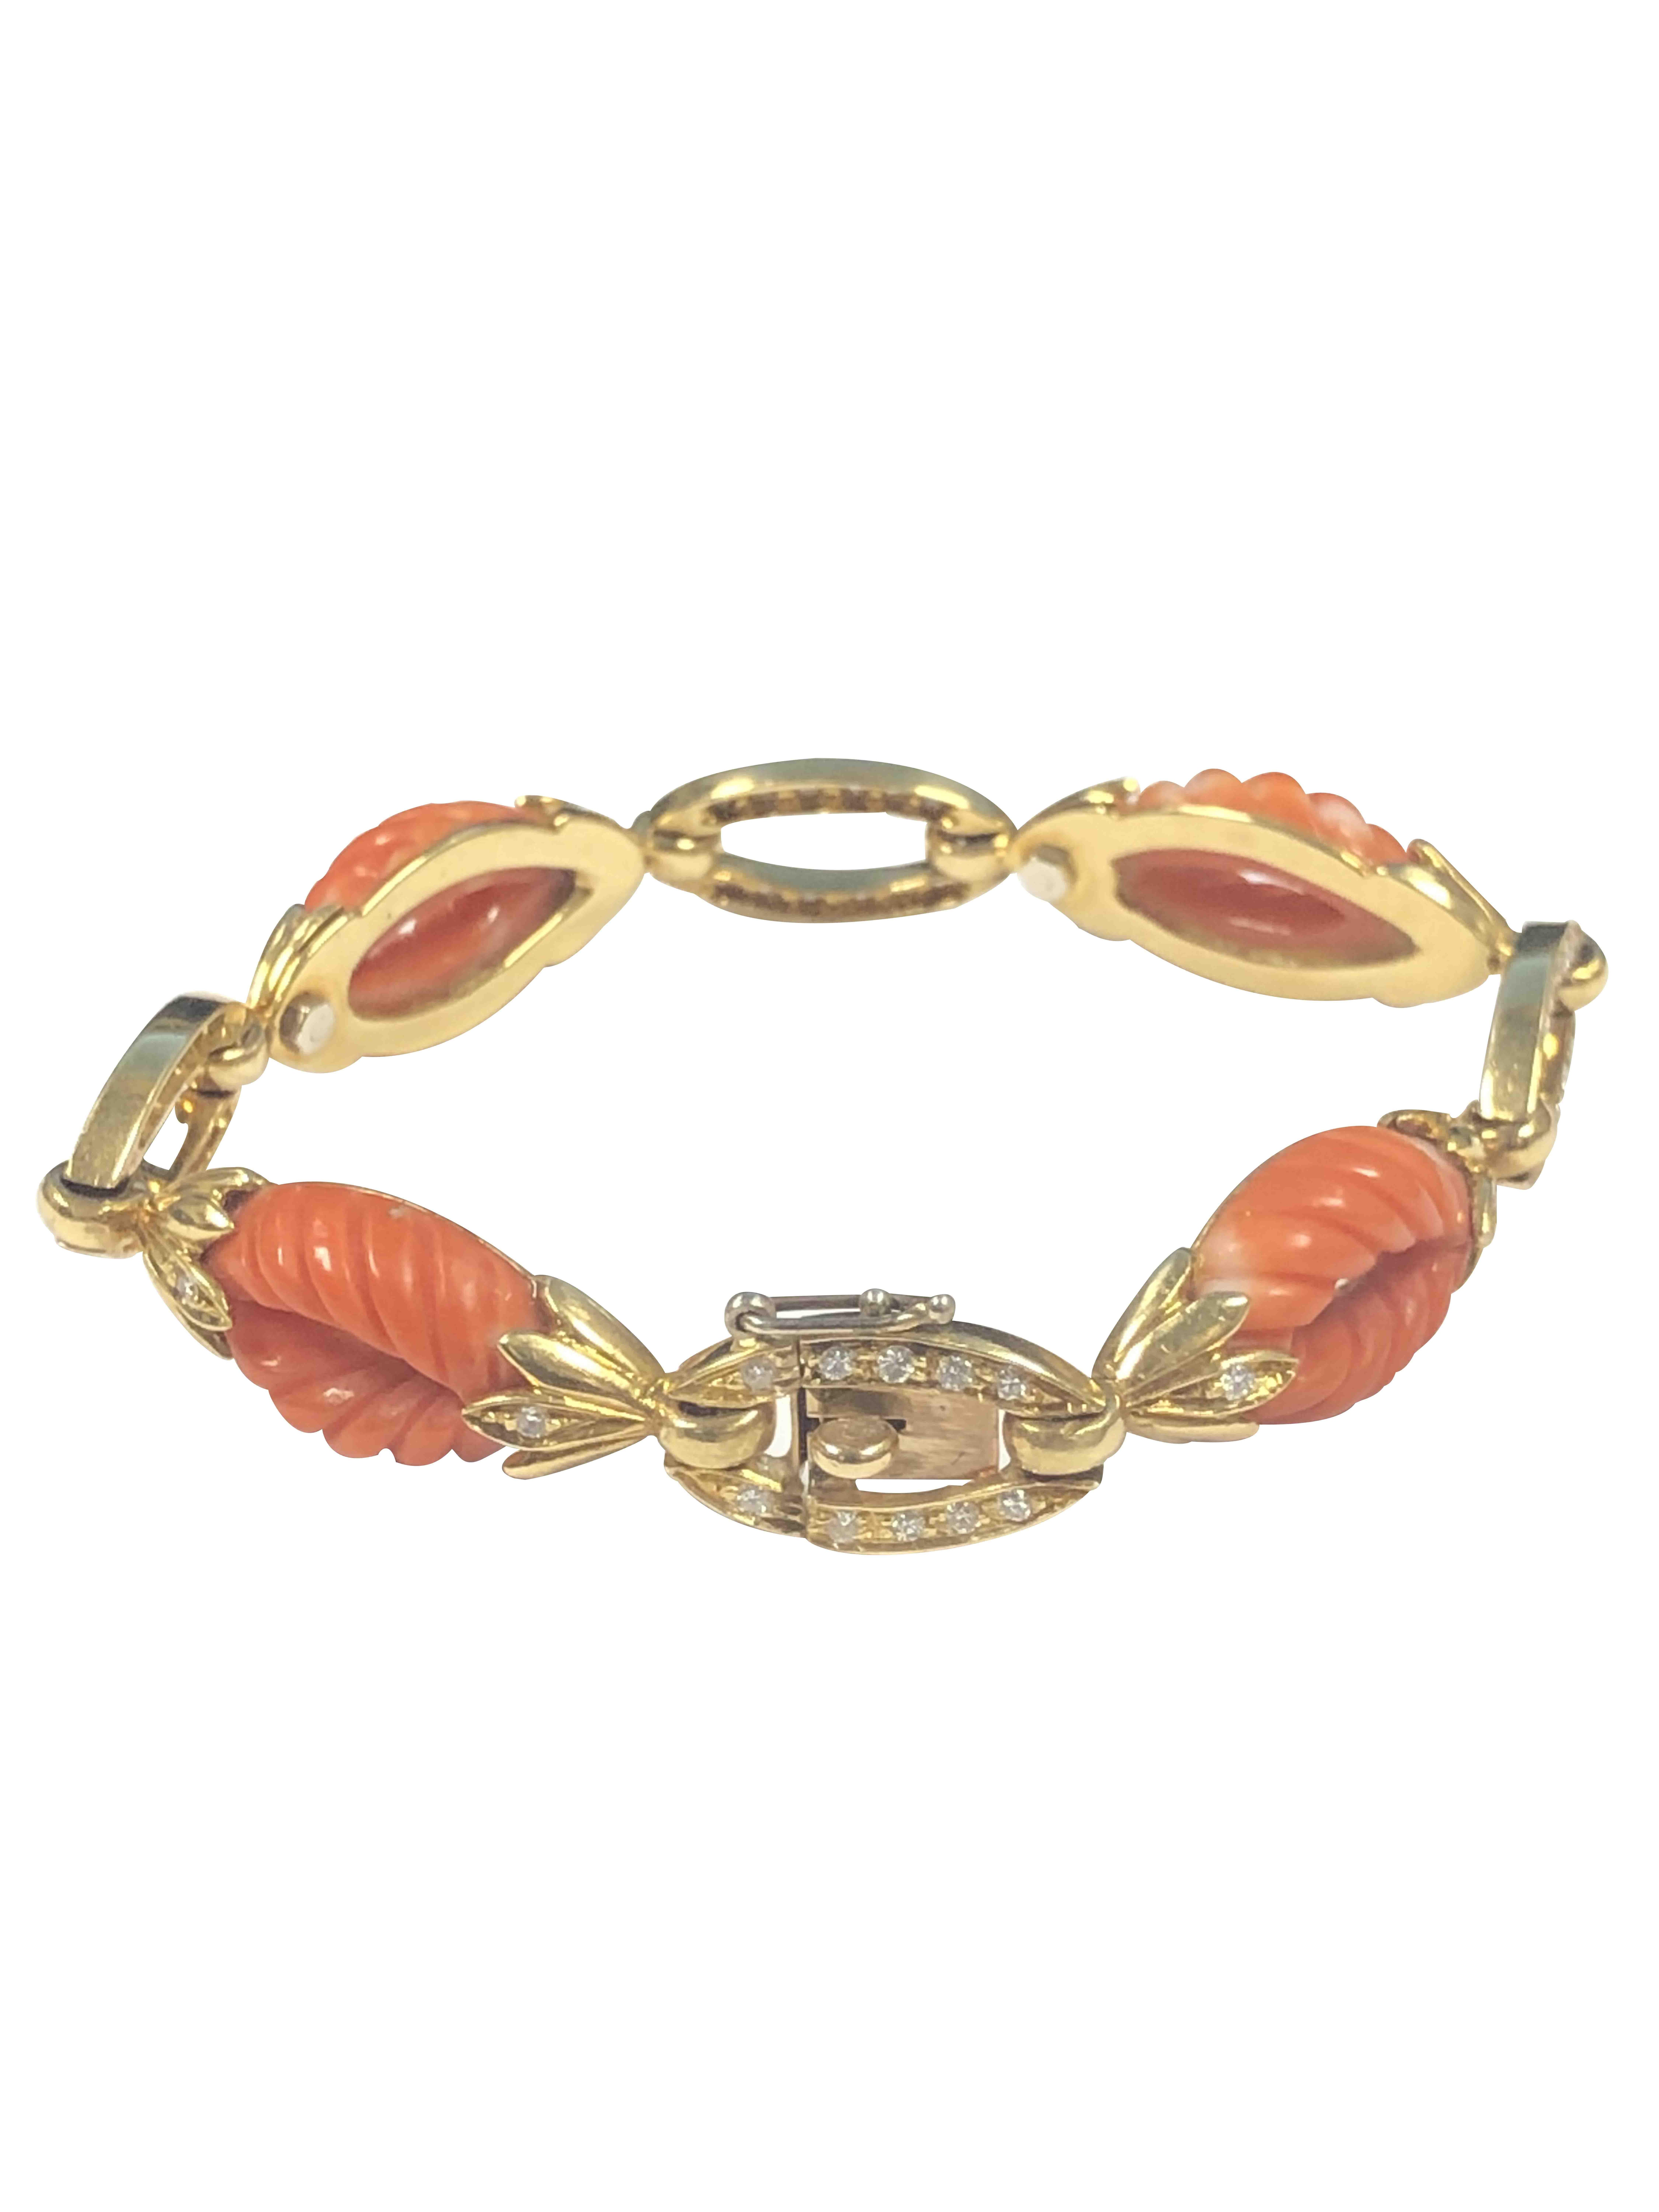 Circa 1970s Italian Made 14K Yellow Gold Bracelet, measuring 7/16 inch wide and 7 1/4 inches in length. This high quality piece features individually bolted and pinned links for soft flexibility, set with carved Coral links of fine Tangerine color